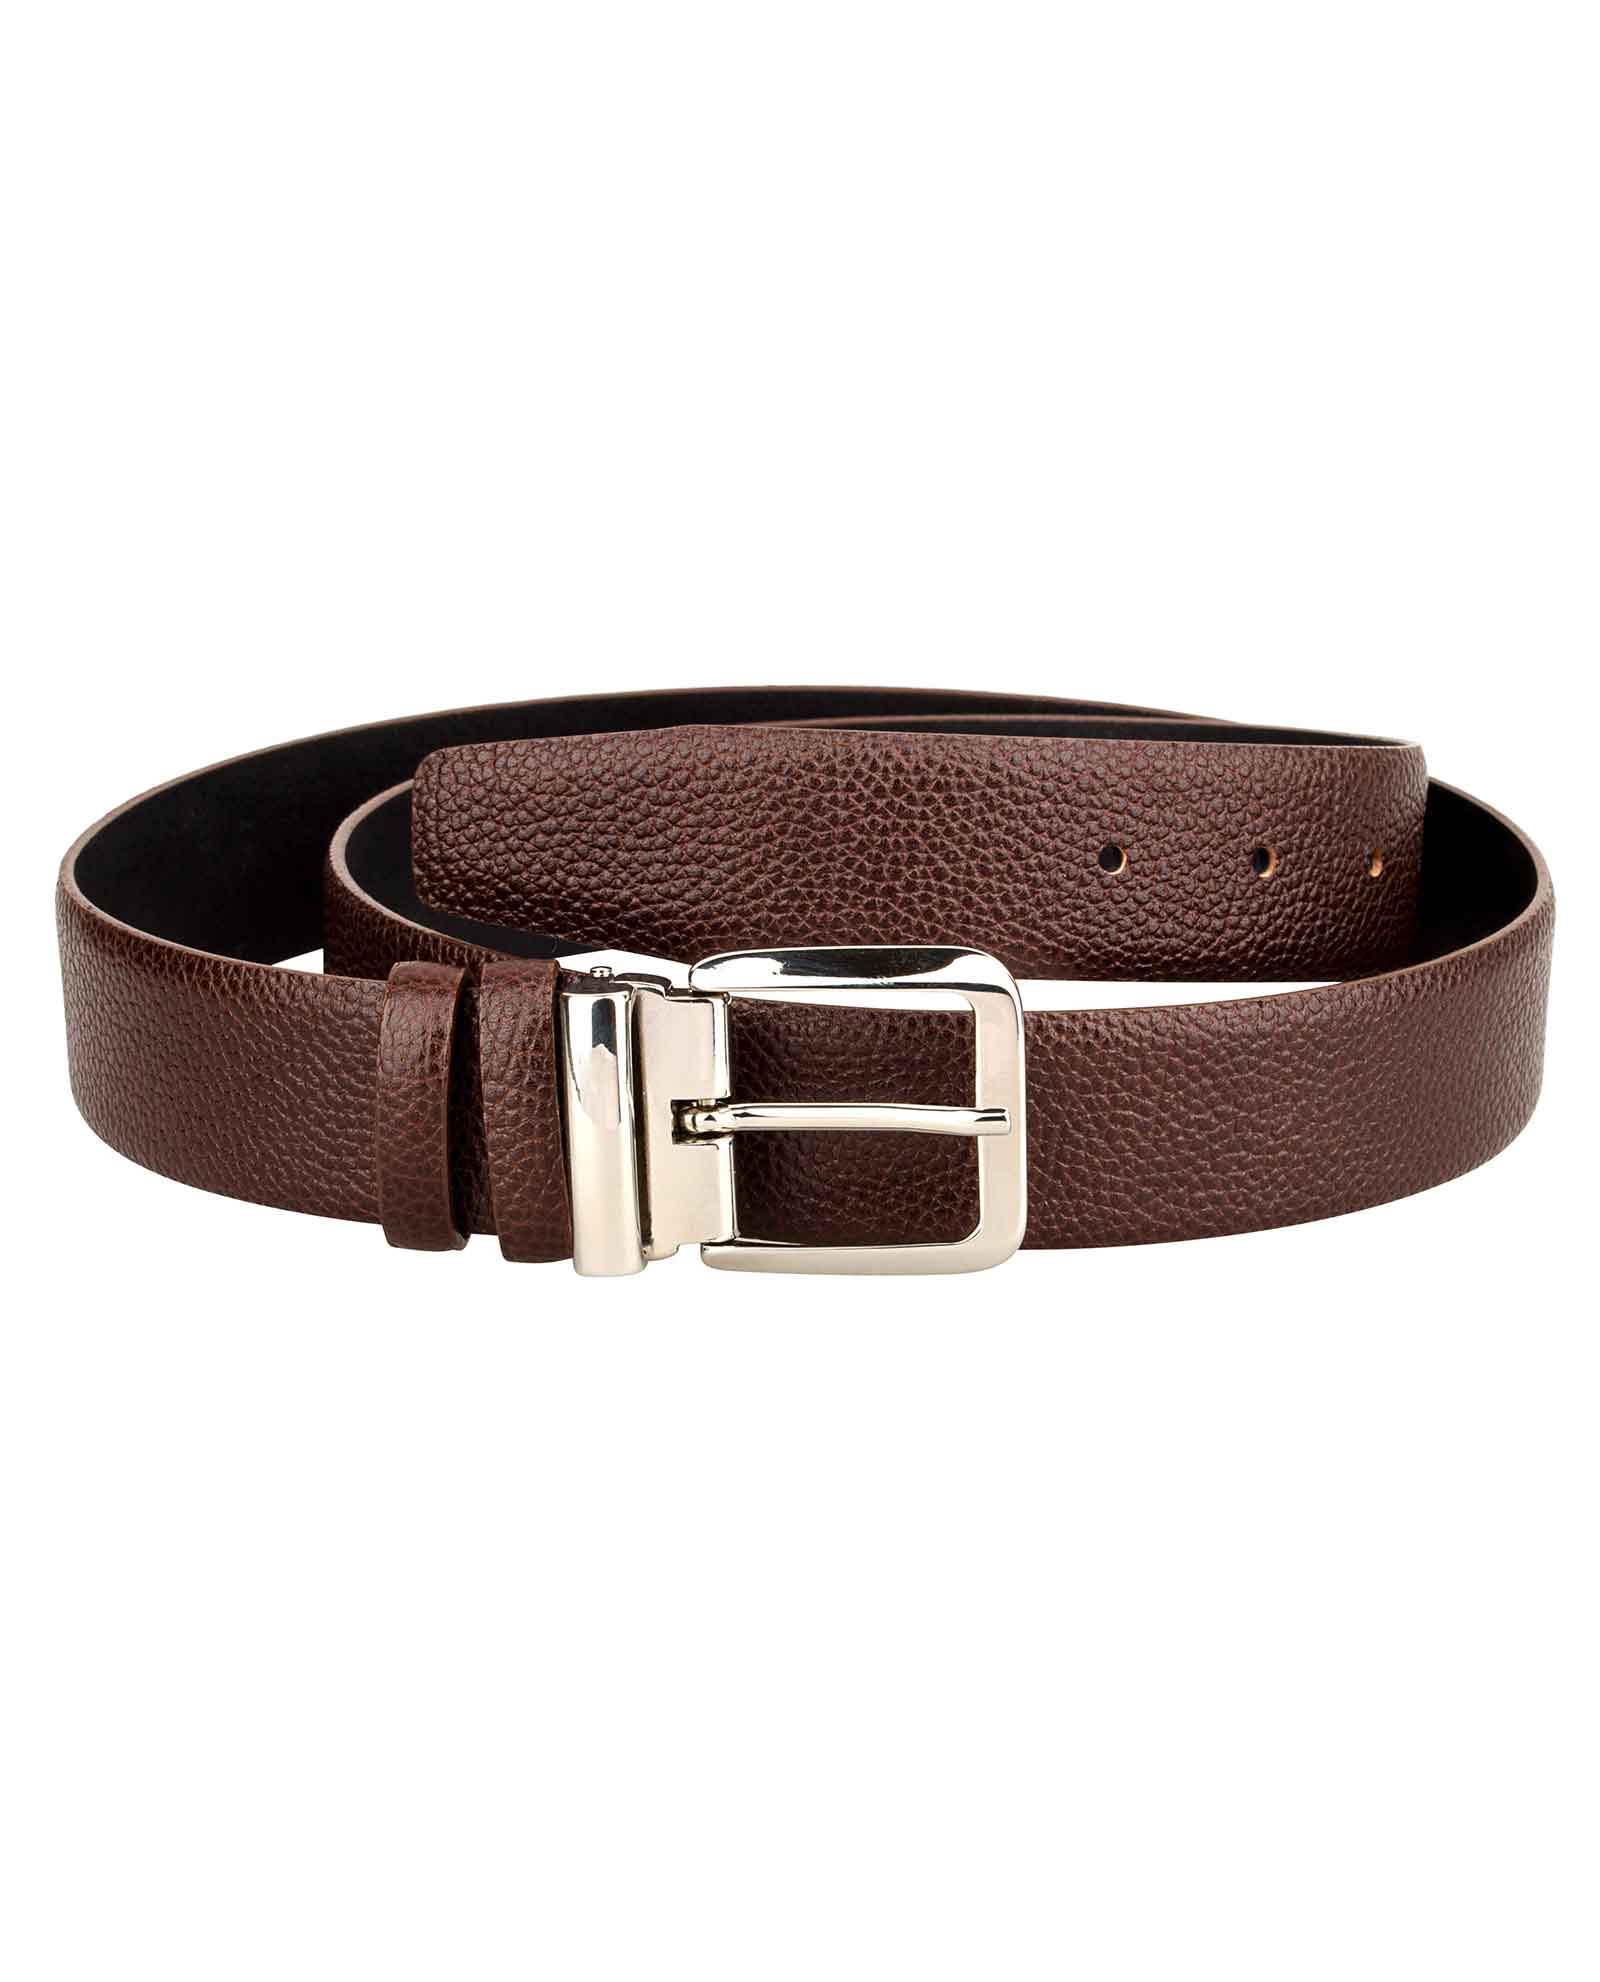 Buy Men's Brown Leather Belt - Made in Italy - Free Shipping